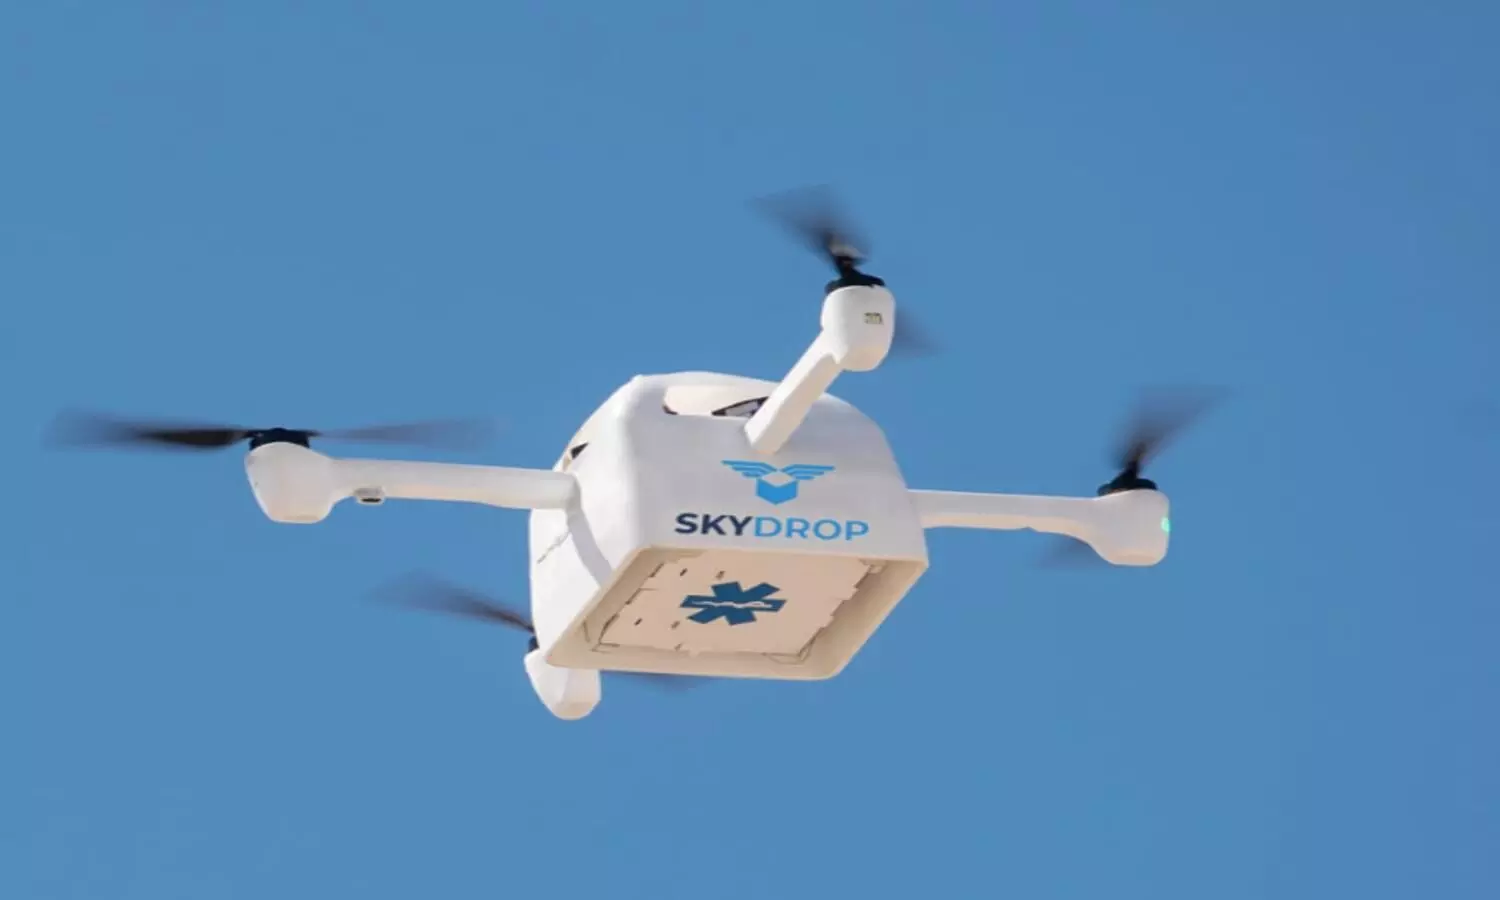 SkyDrop is set to launch regular drone deliveries in New Zealand